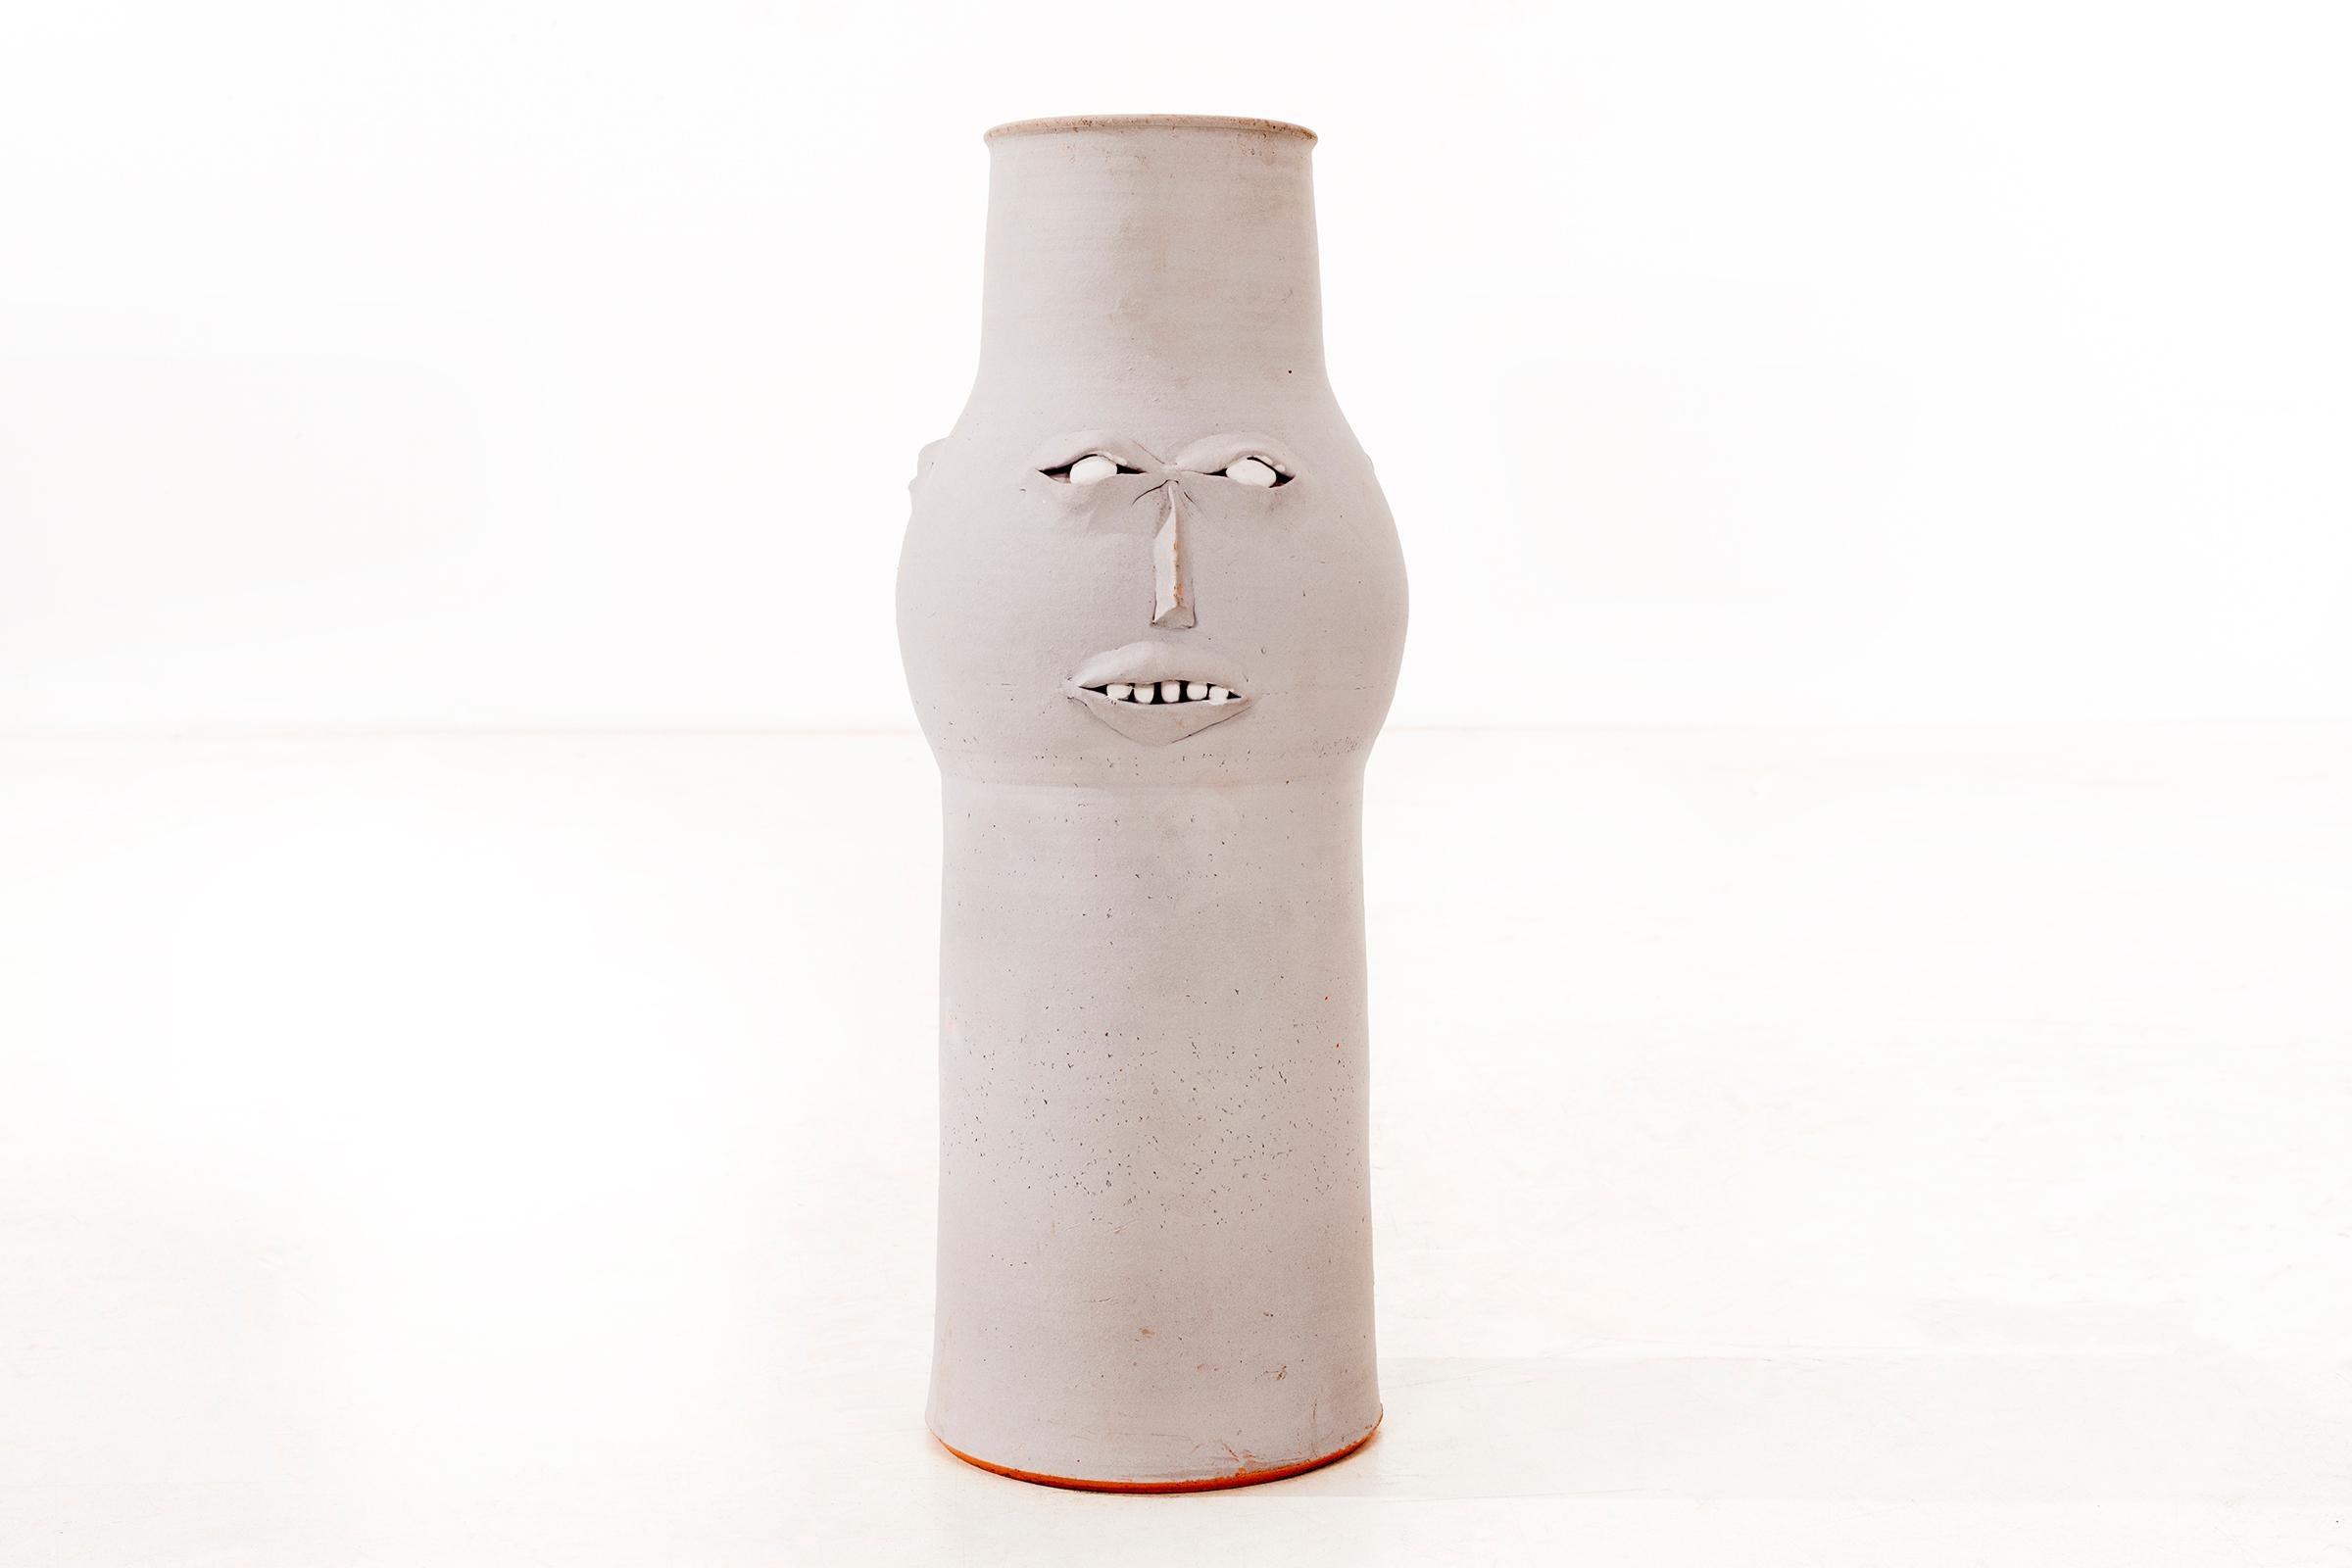 Clyde Burt stylized face vase in matte gray glazed stoneware with manipulated and applied facial details.
Signed to underside: [CB].
American, circa 1965.